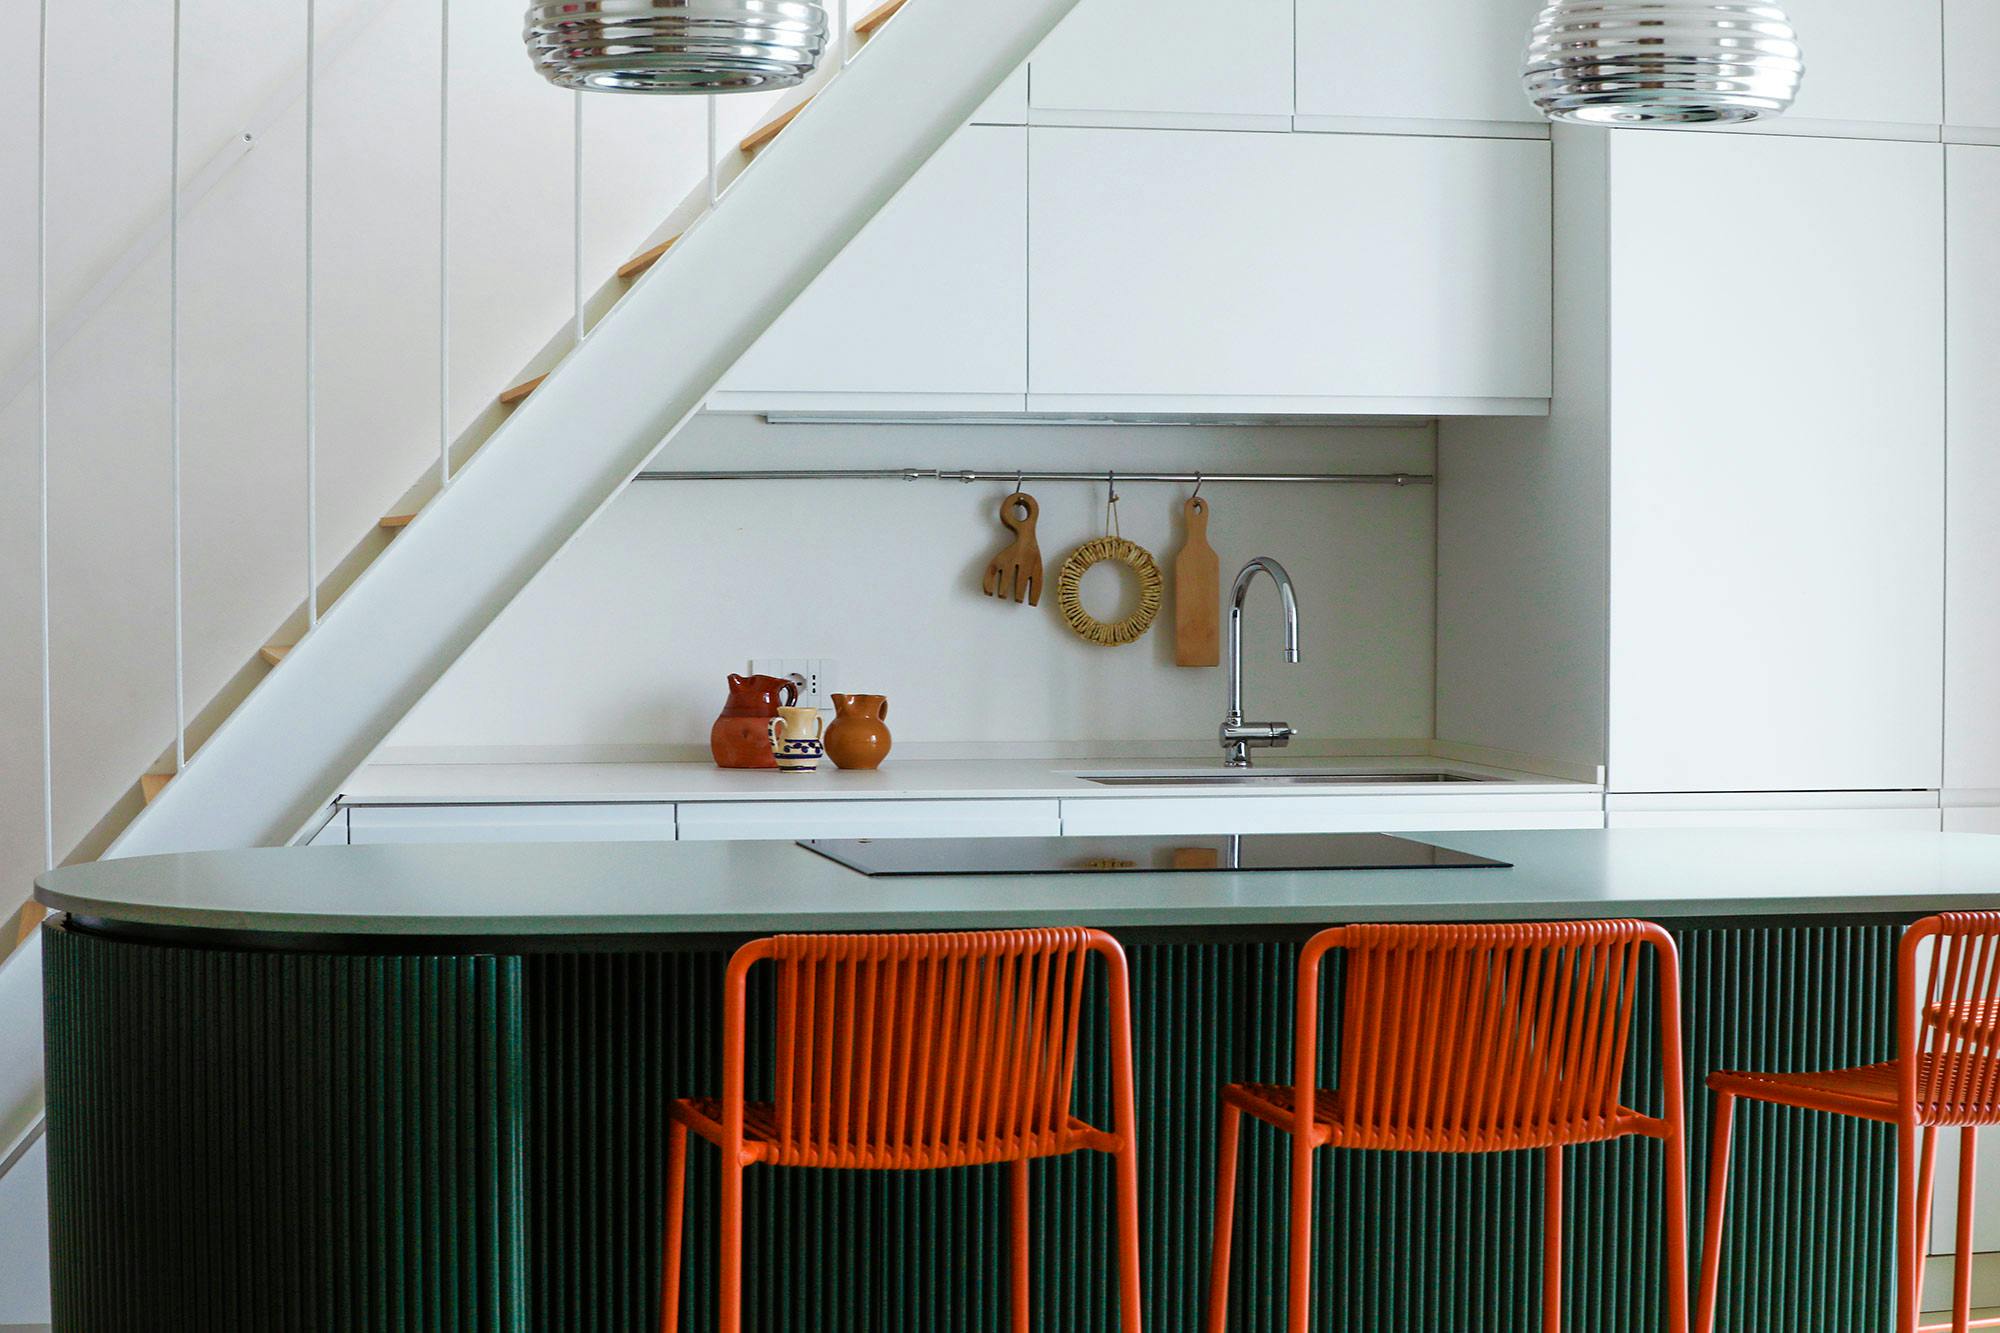 Numéro d'image 32 de la section actuelle de {{A functional kitchen under the stairs to make the most of space without compromising on design}} de Cosentino Canada